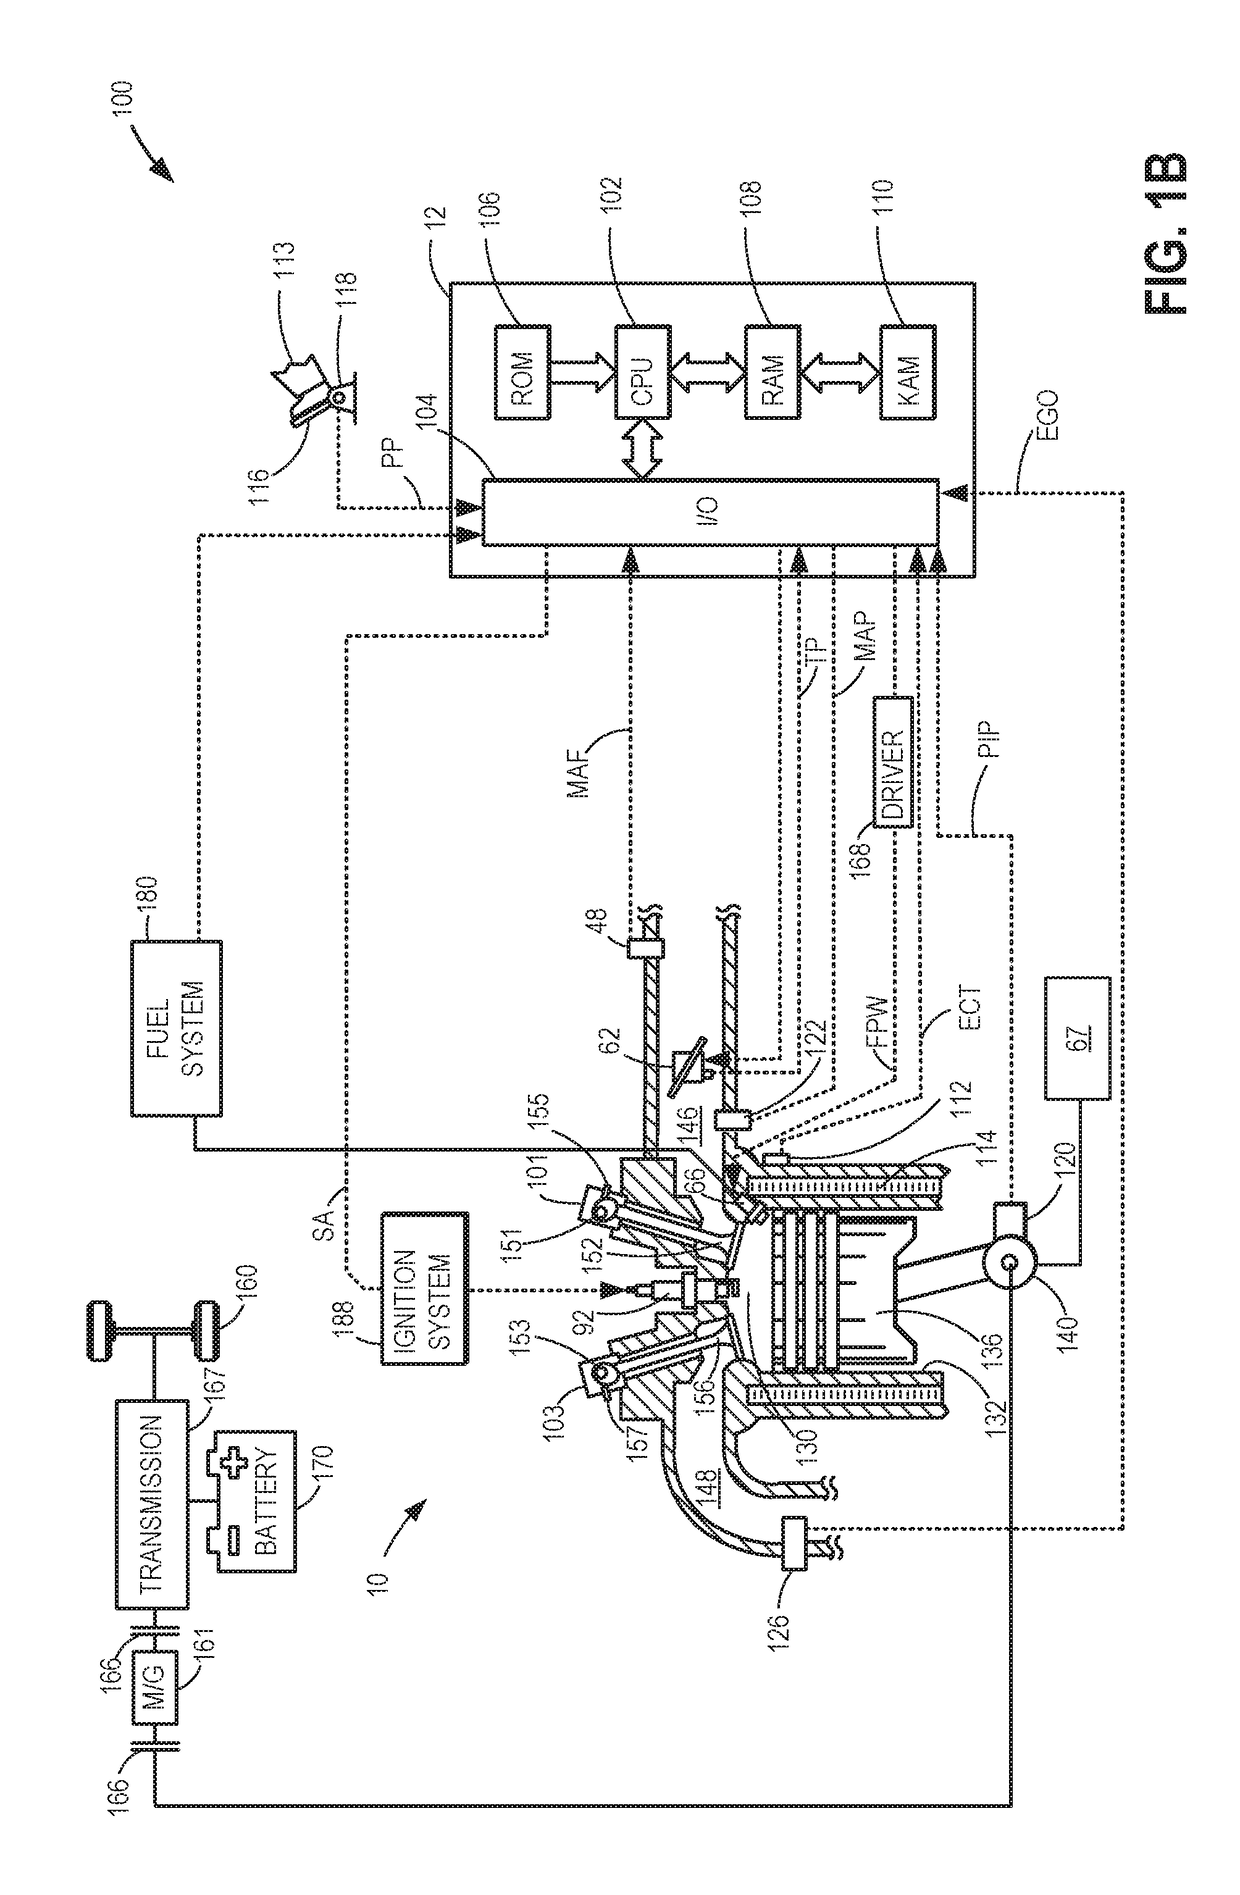 Systems and methods for a split exhaust engine system